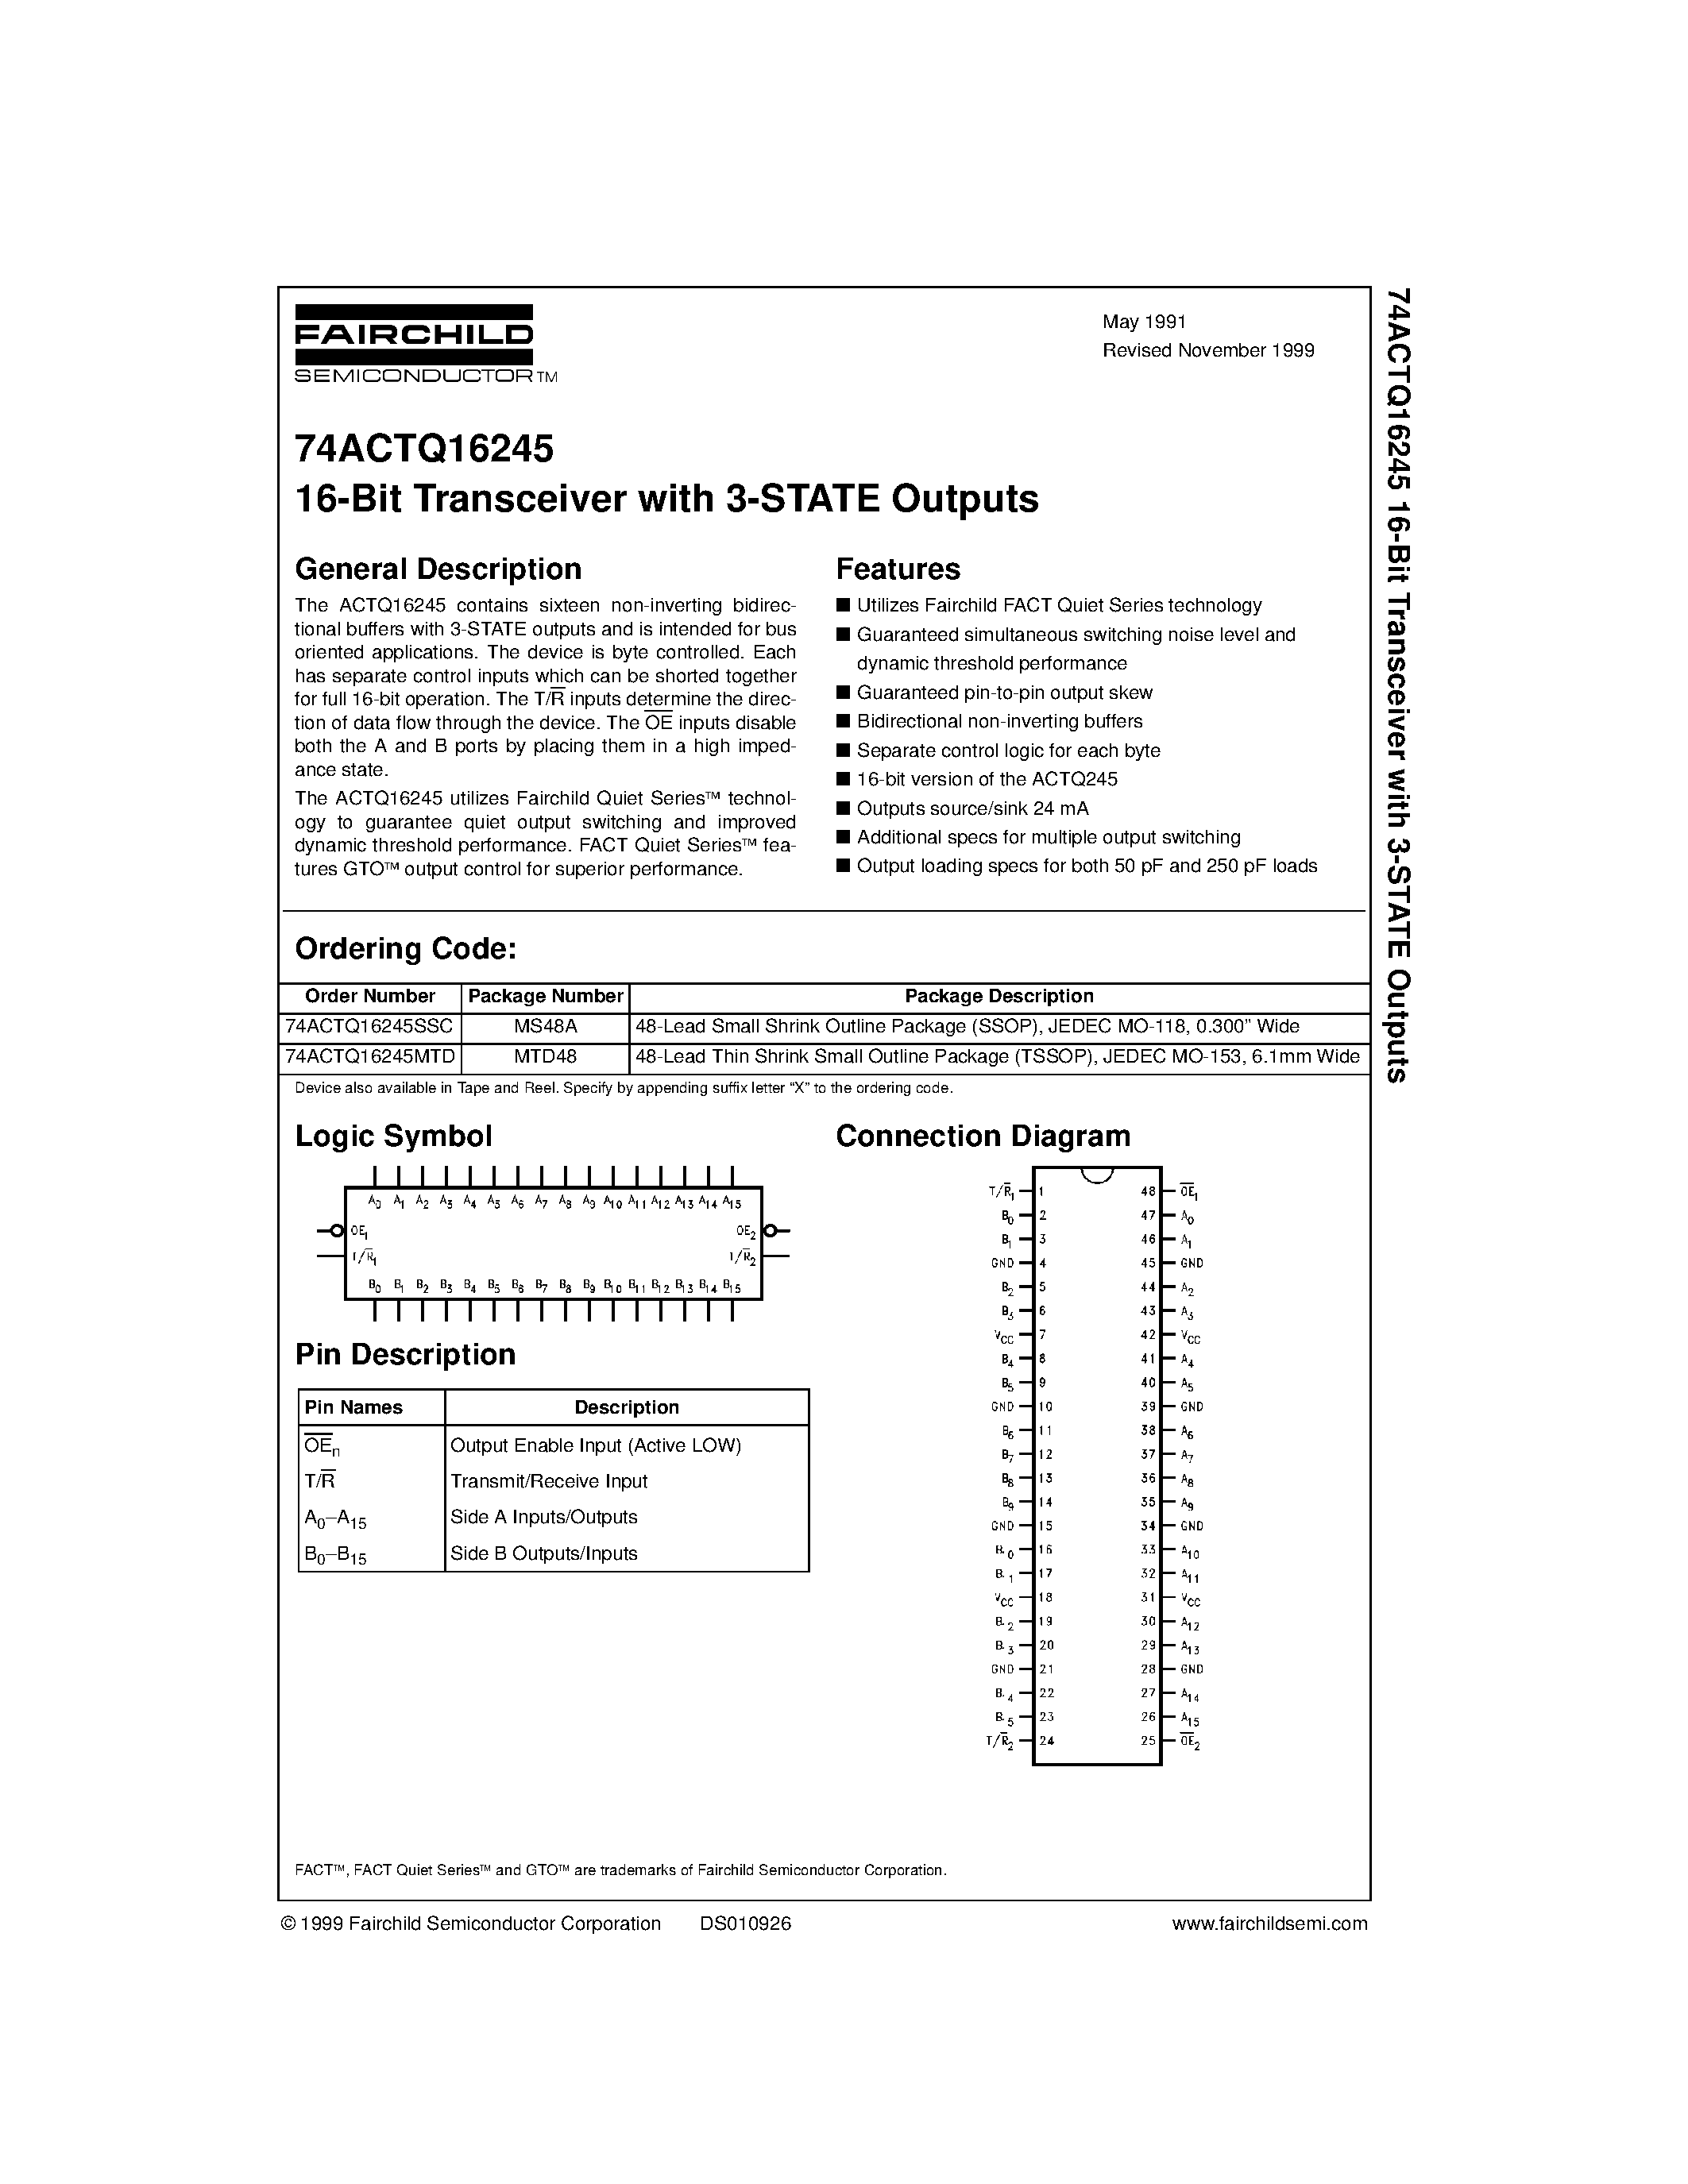 Datasheet 74ACTQ16245SSC - 16-Bit Transceiver with 3-STATE Outputs page 1